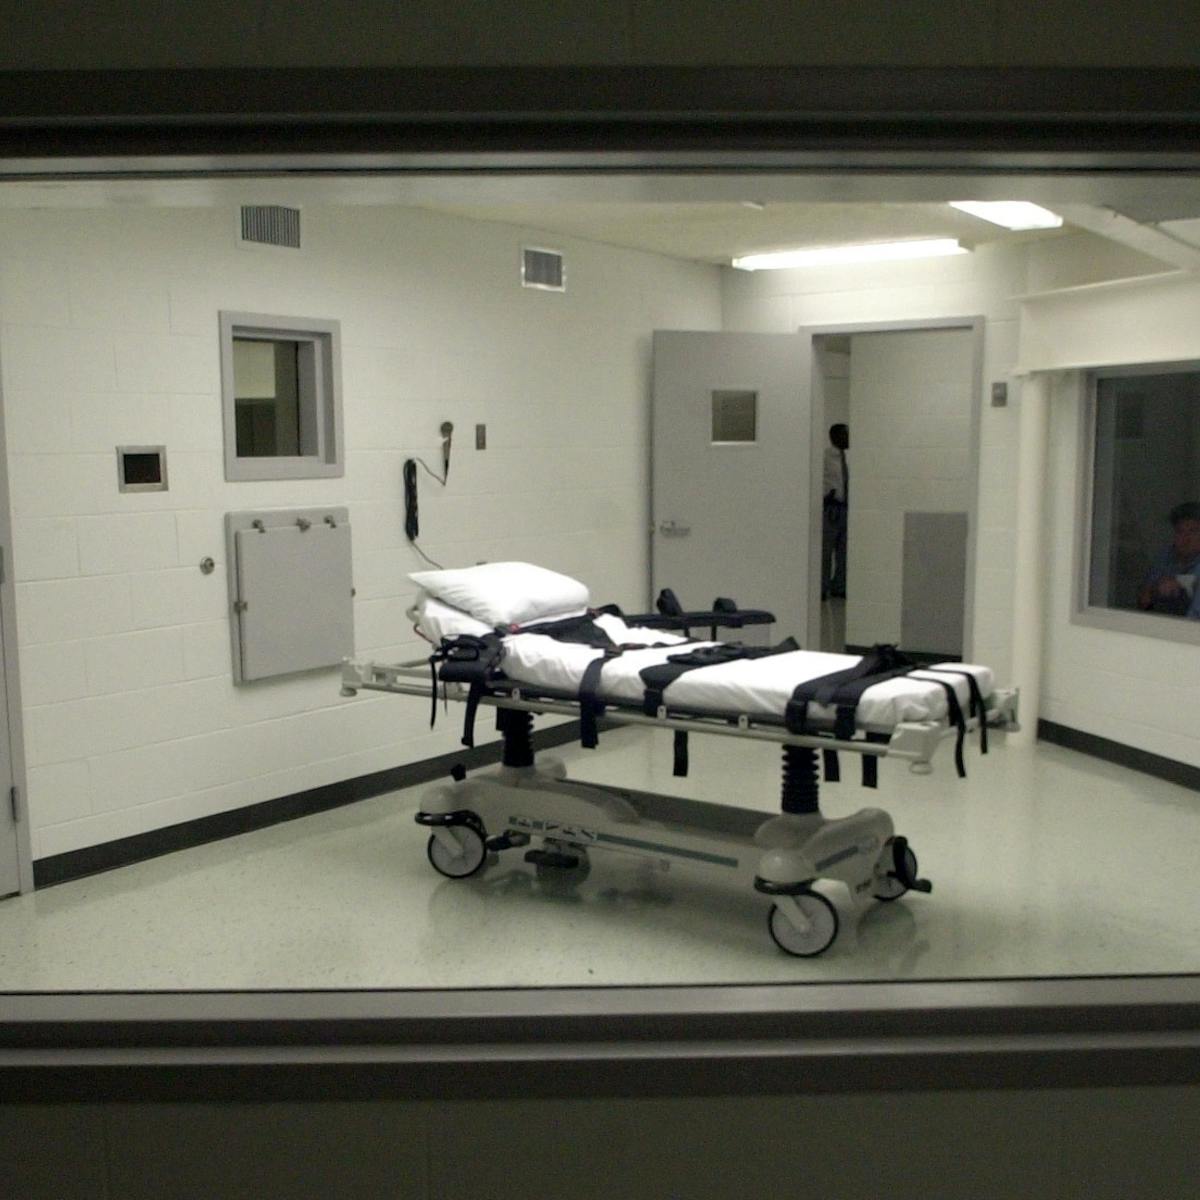 the high cost of death penalty